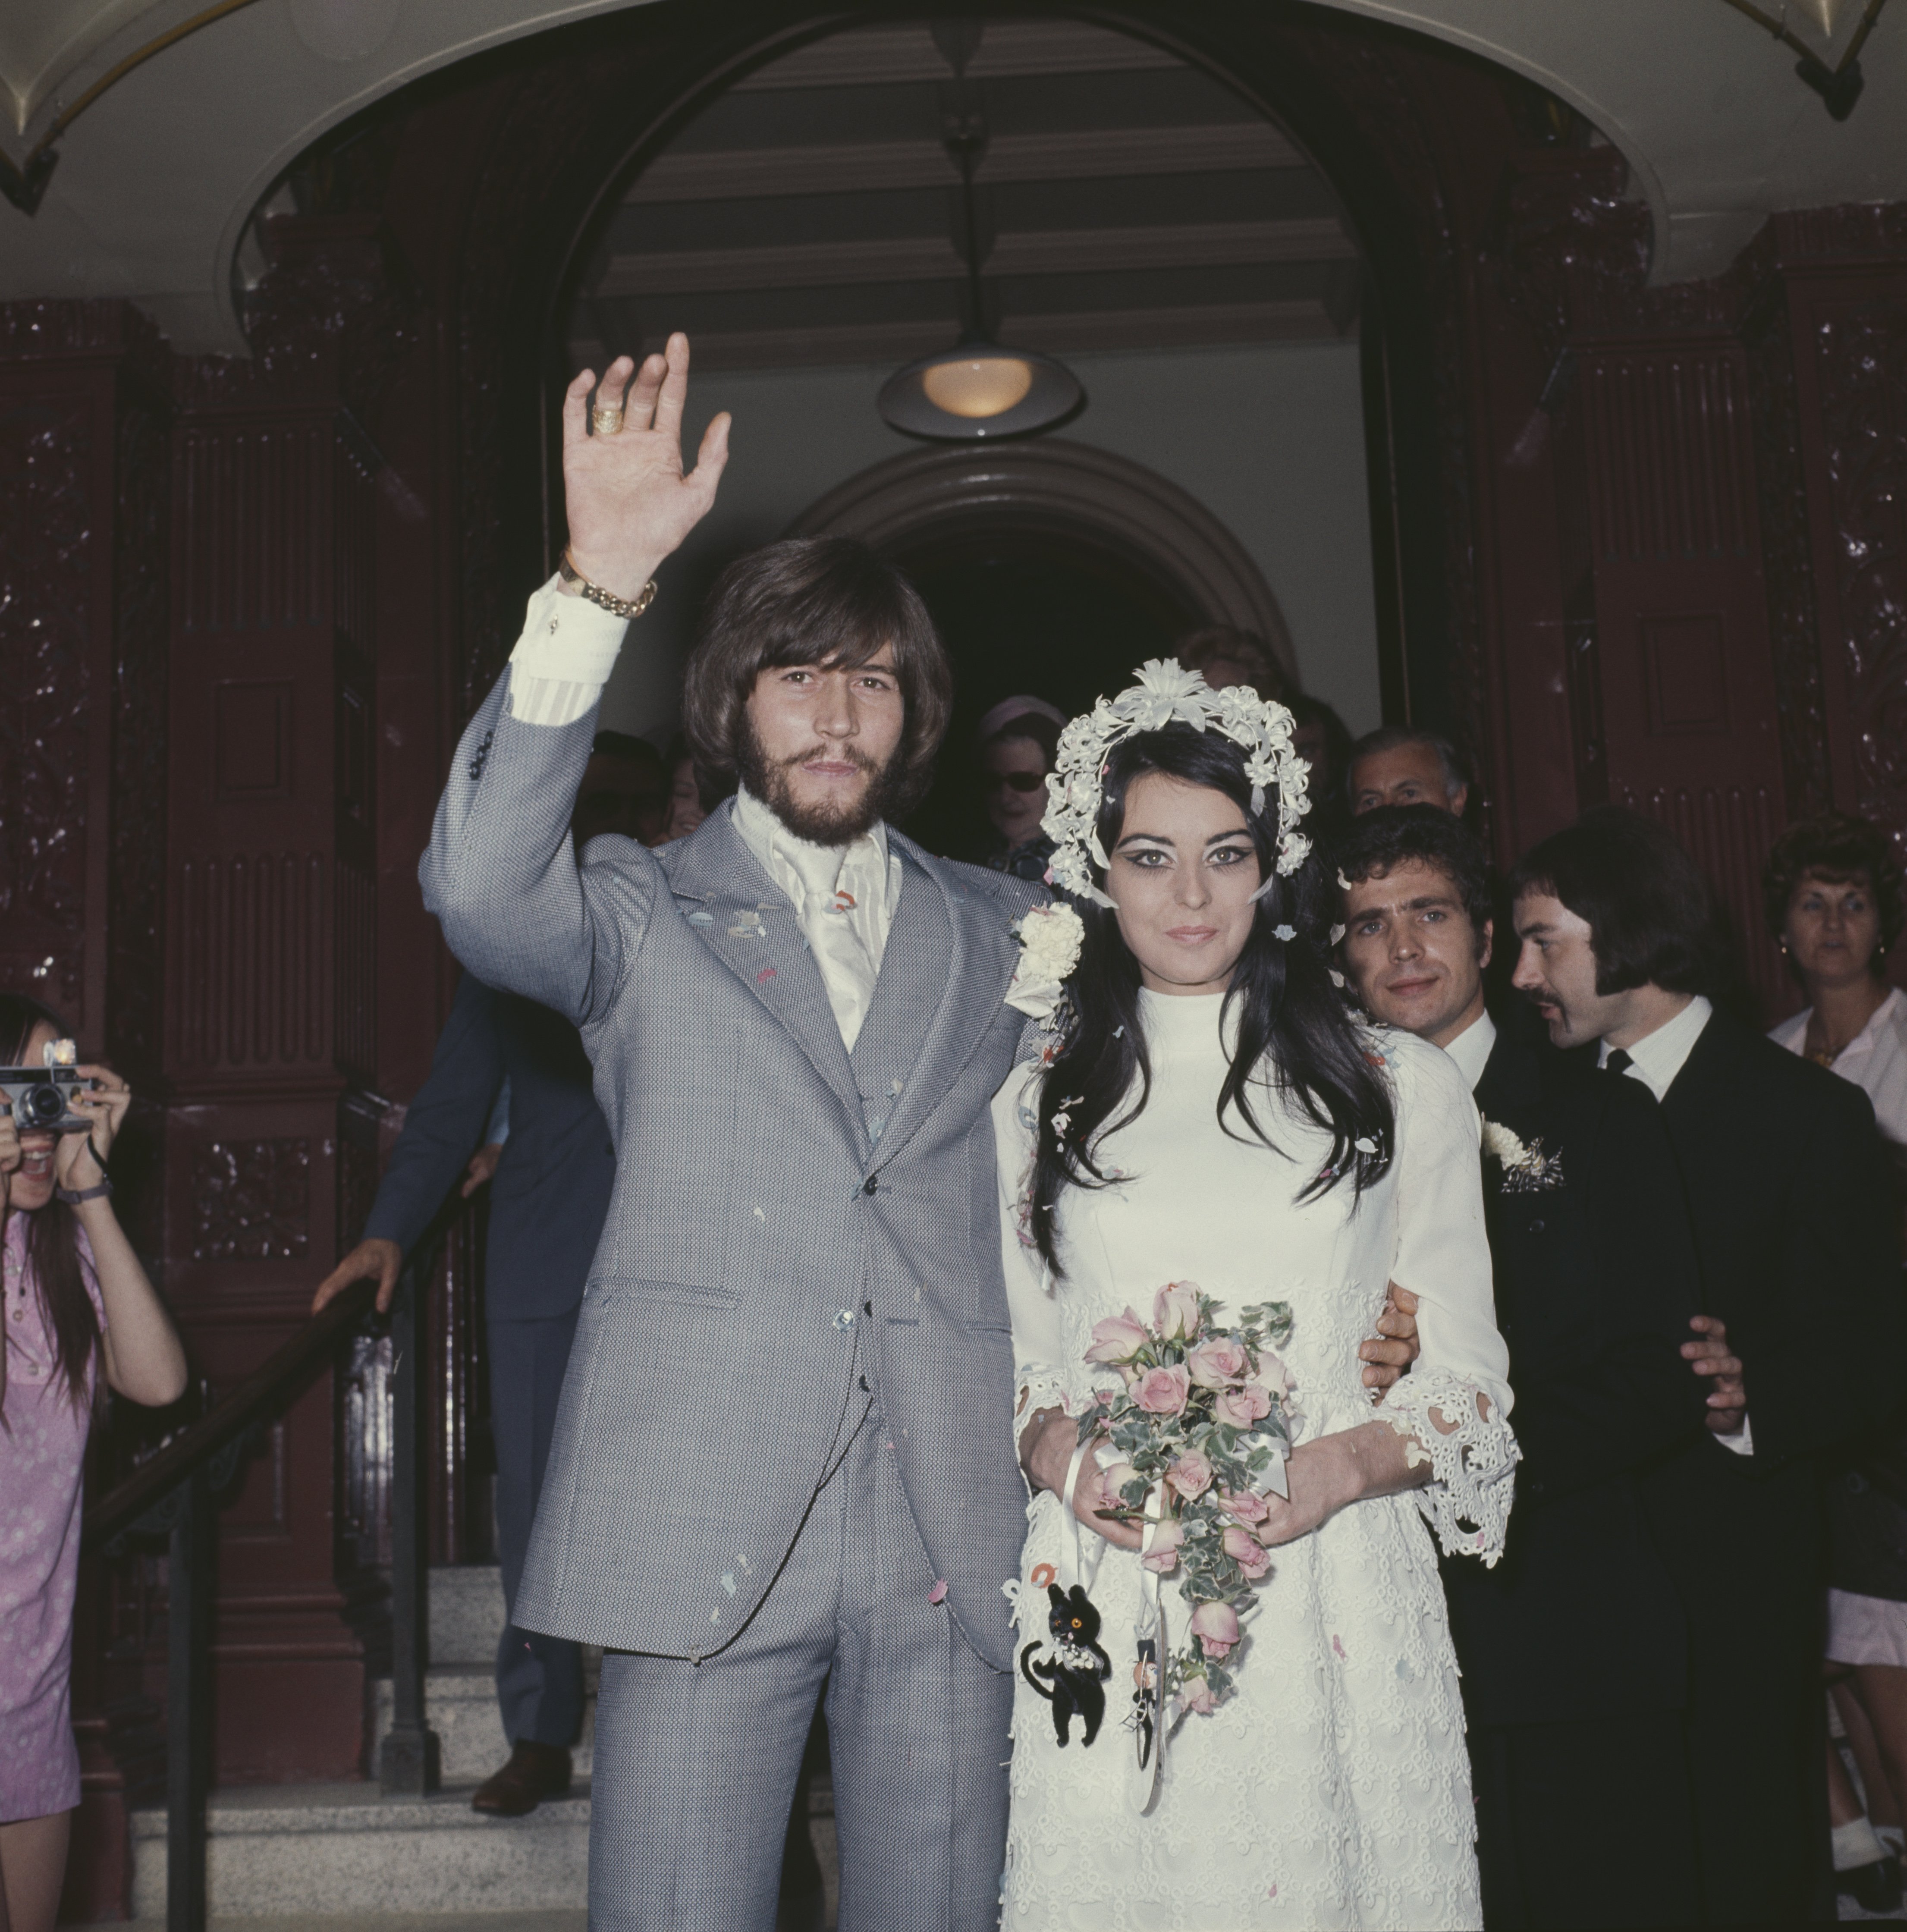 Barry Gibb of the Bee Gees marries Linda Gray on September 1, 1970. | Source: Getty Images